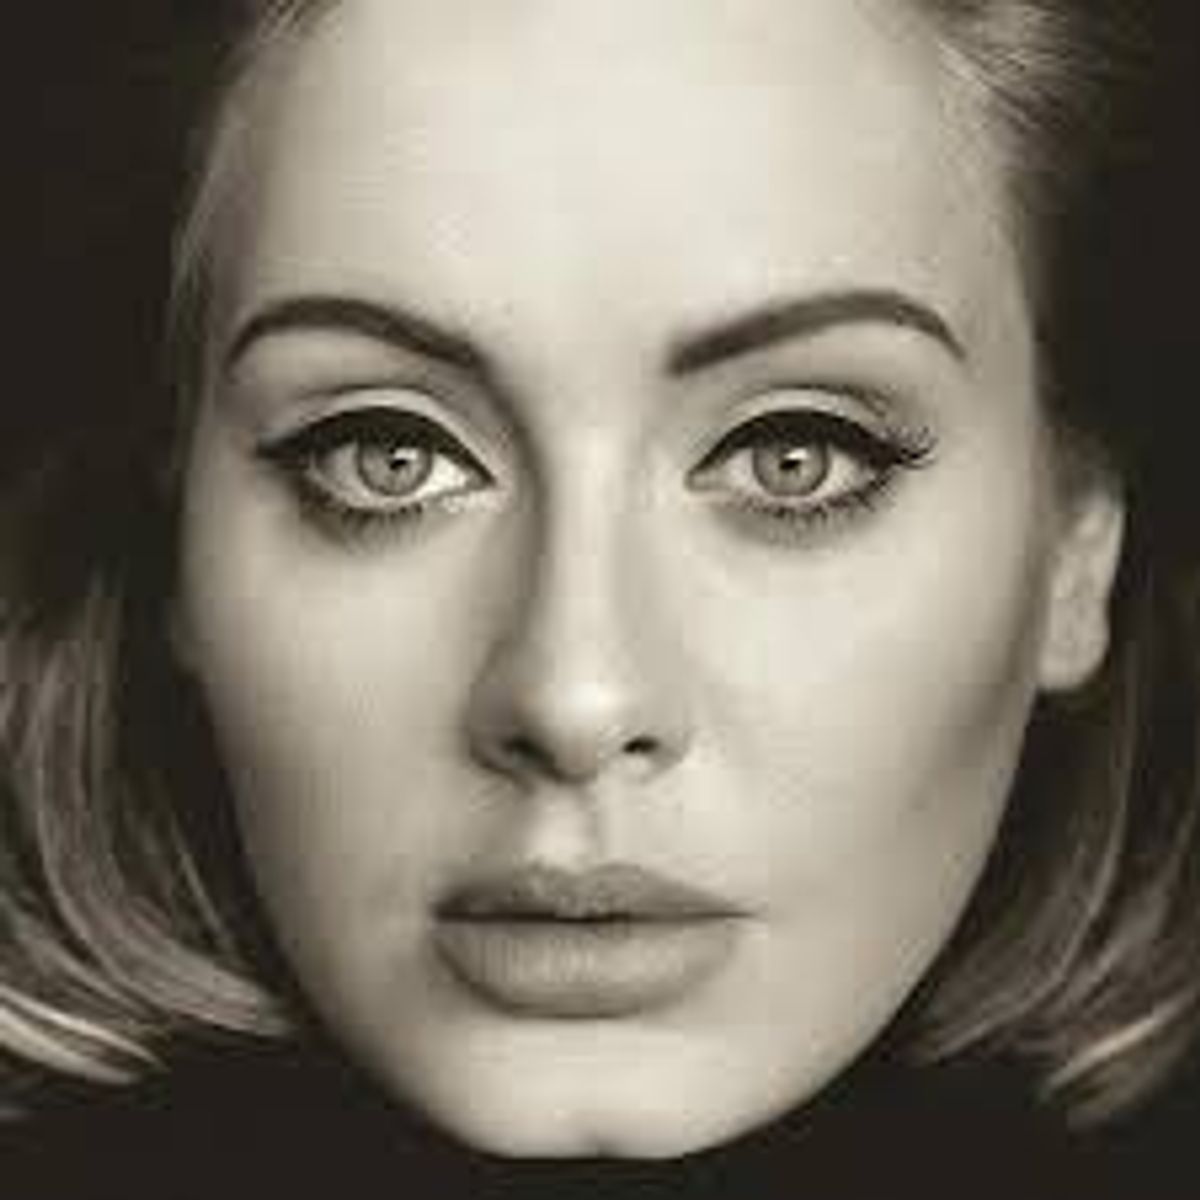 The 5 Stages Of Grief You Went Through Listening To Adele's New Single